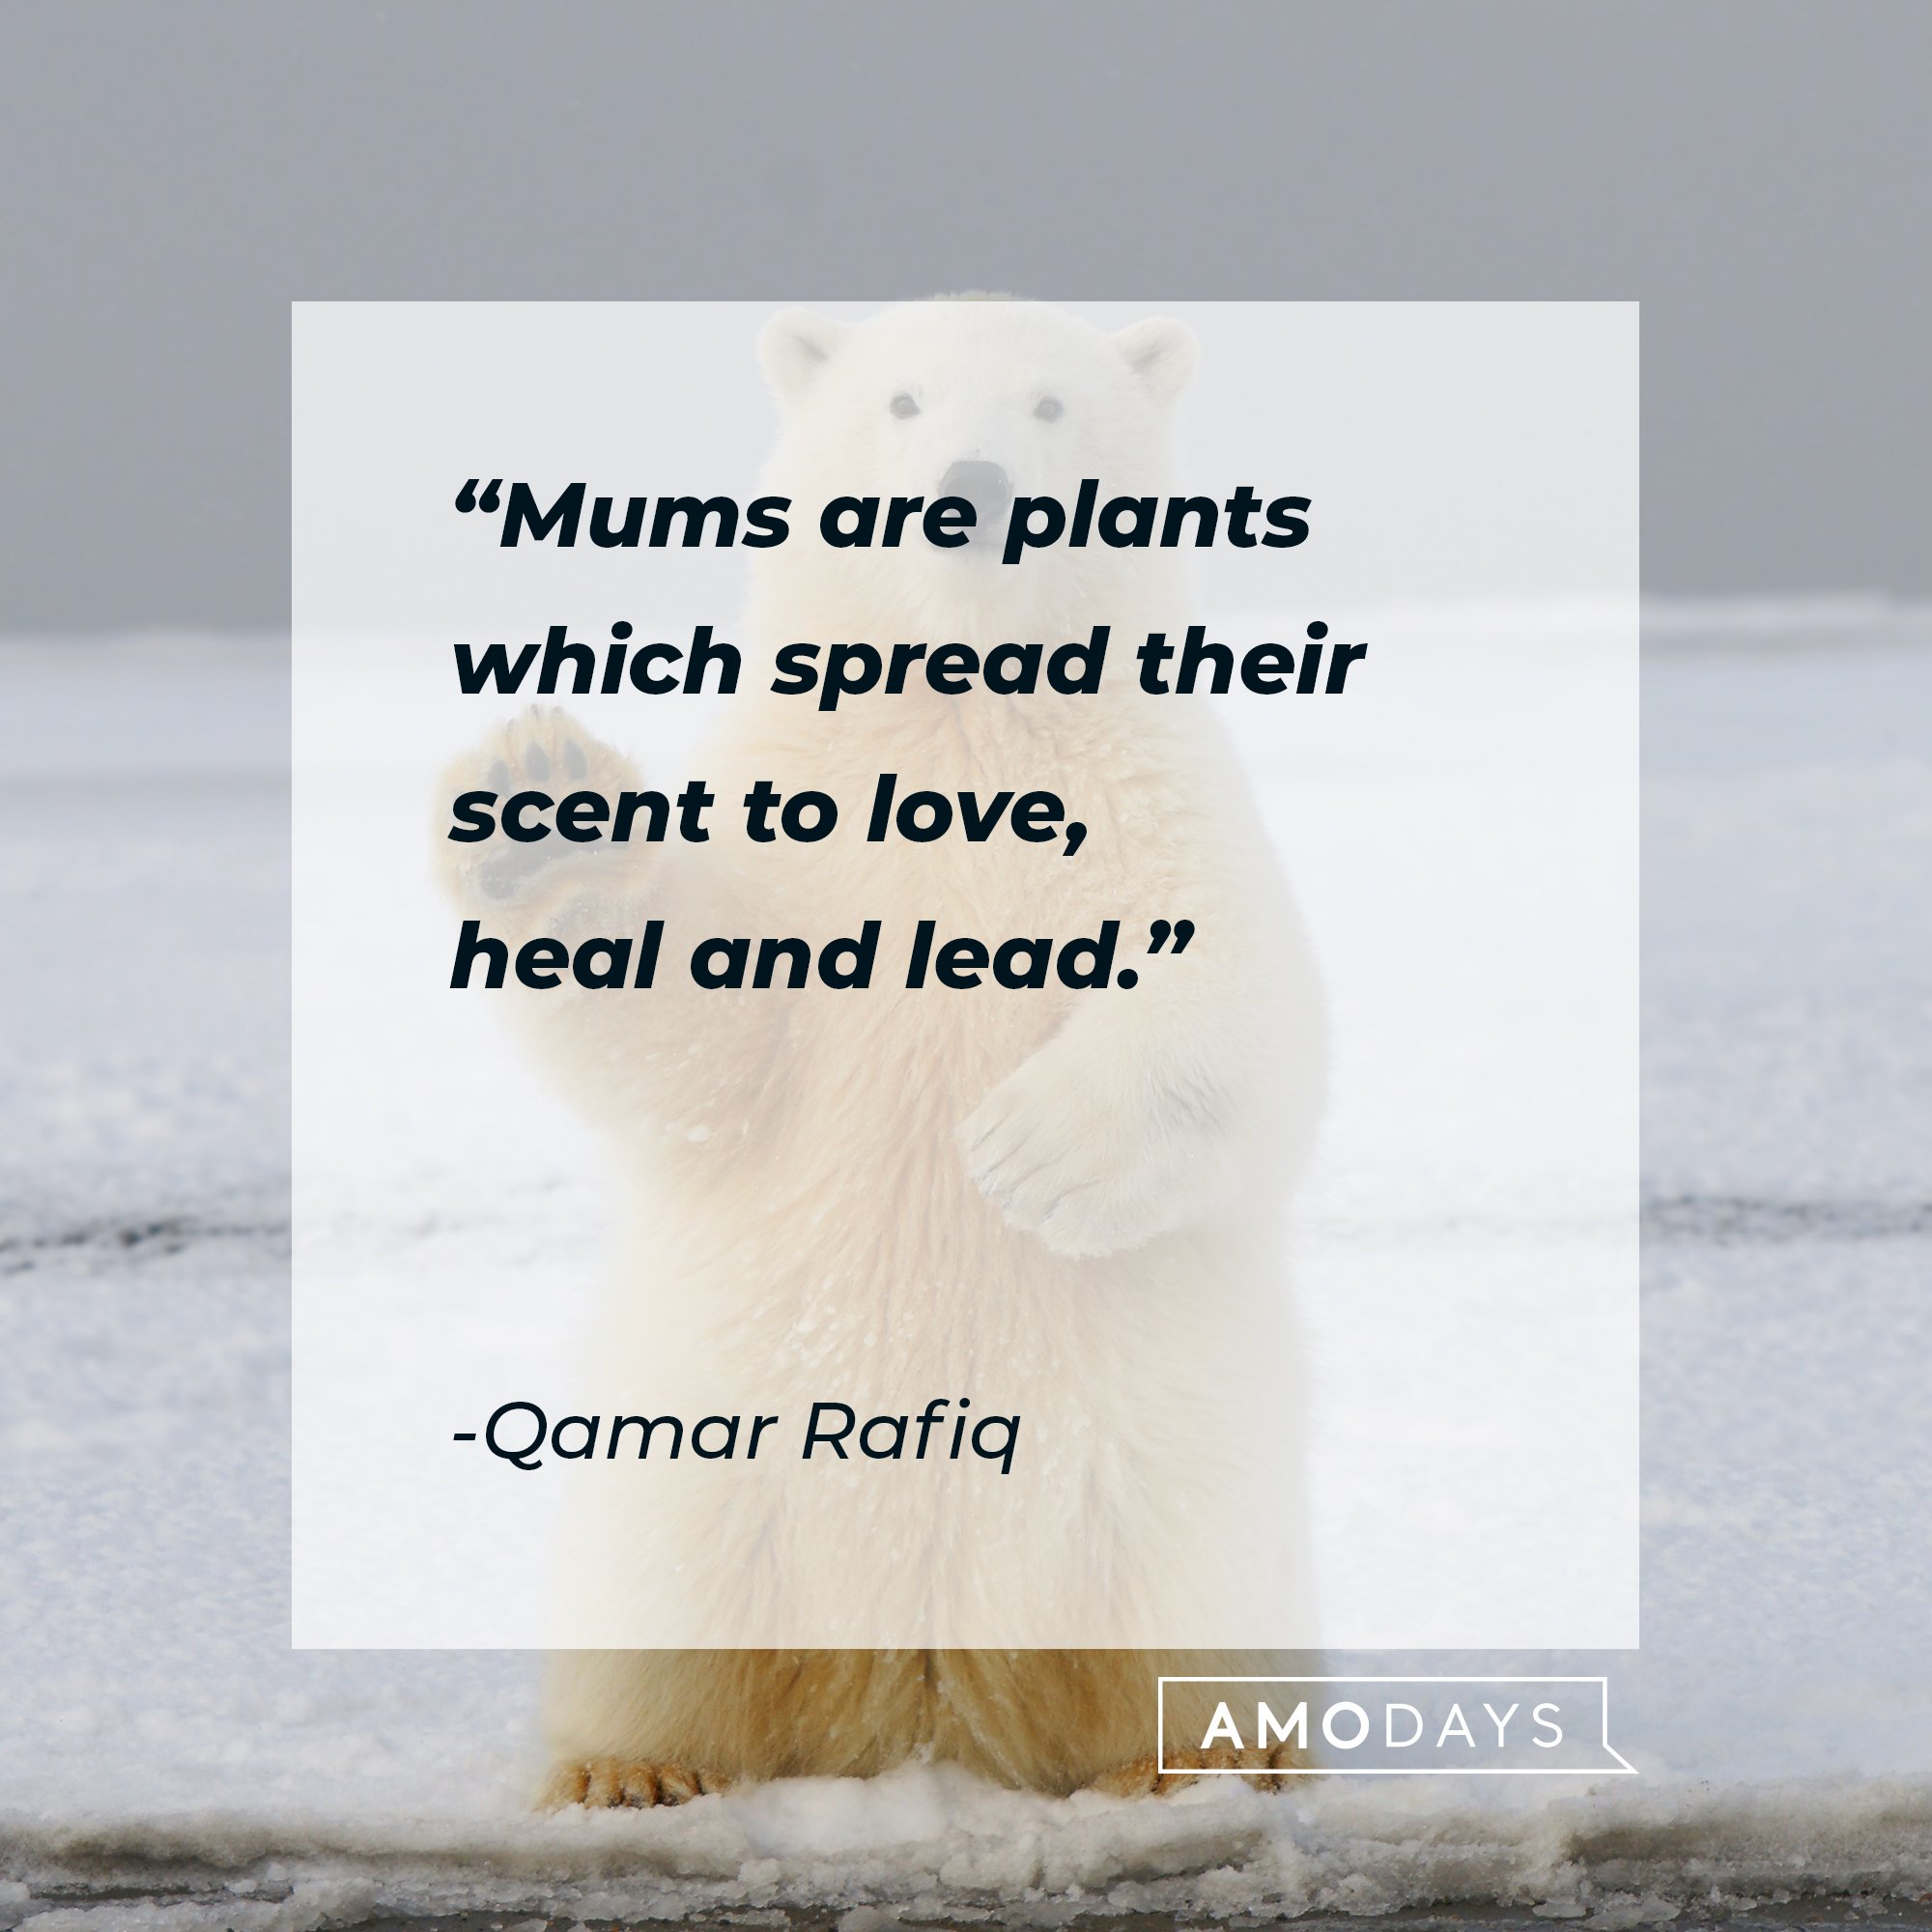 Qamar Rafiq's quote: "Mums are plants which spread their scent to love, heal and lead." | Image: AmoDays